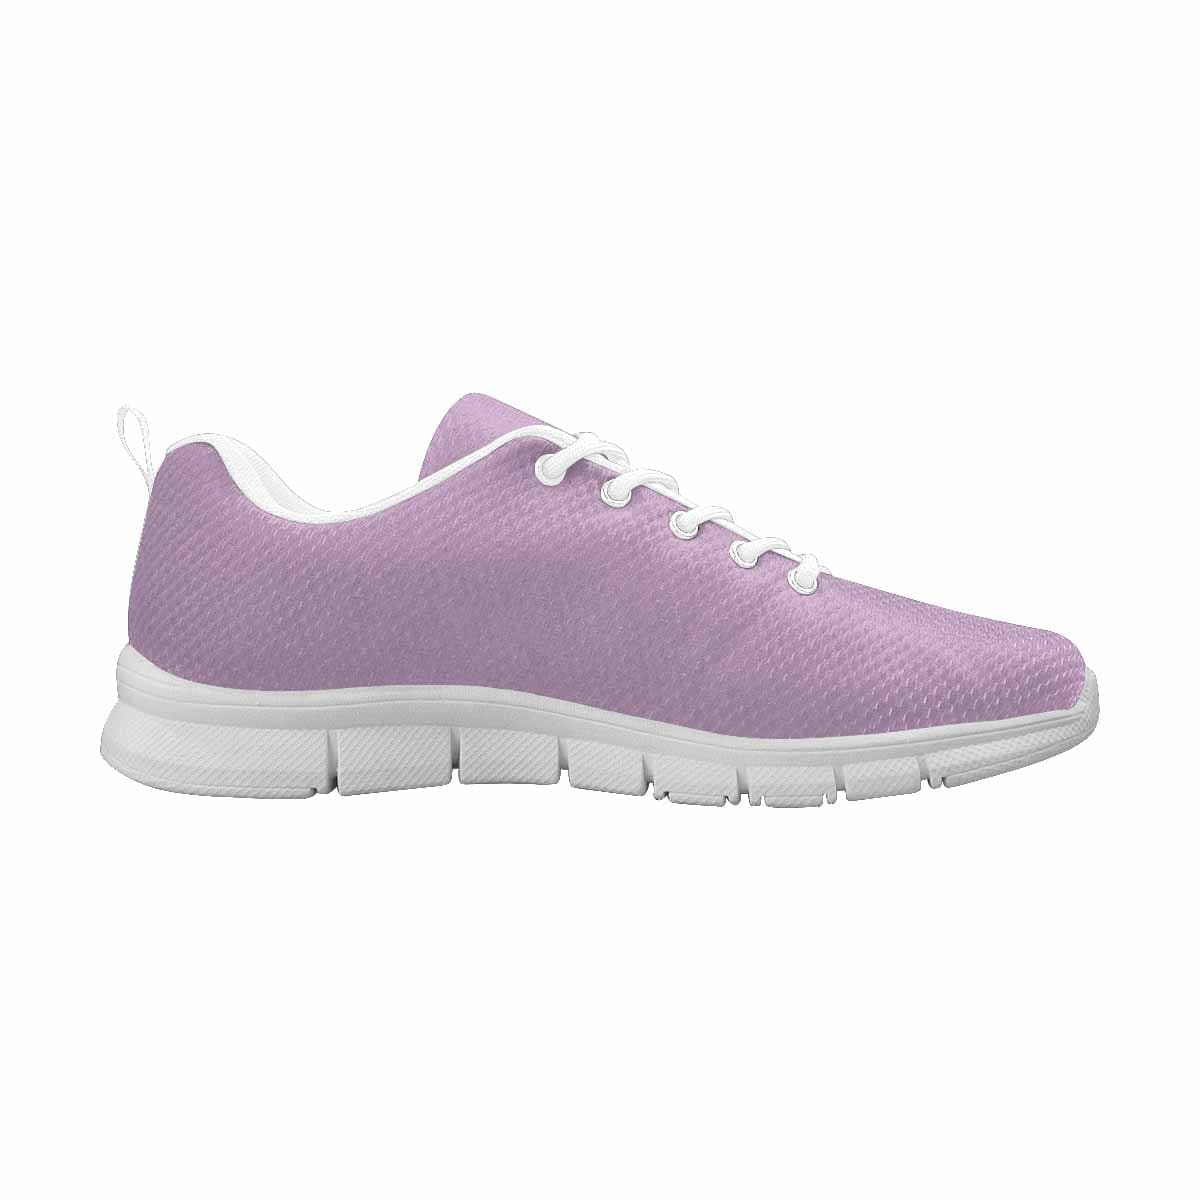 Sneakers For Men Lilac Purple - Canvas Mesh Athletic Running Shoes - Mens